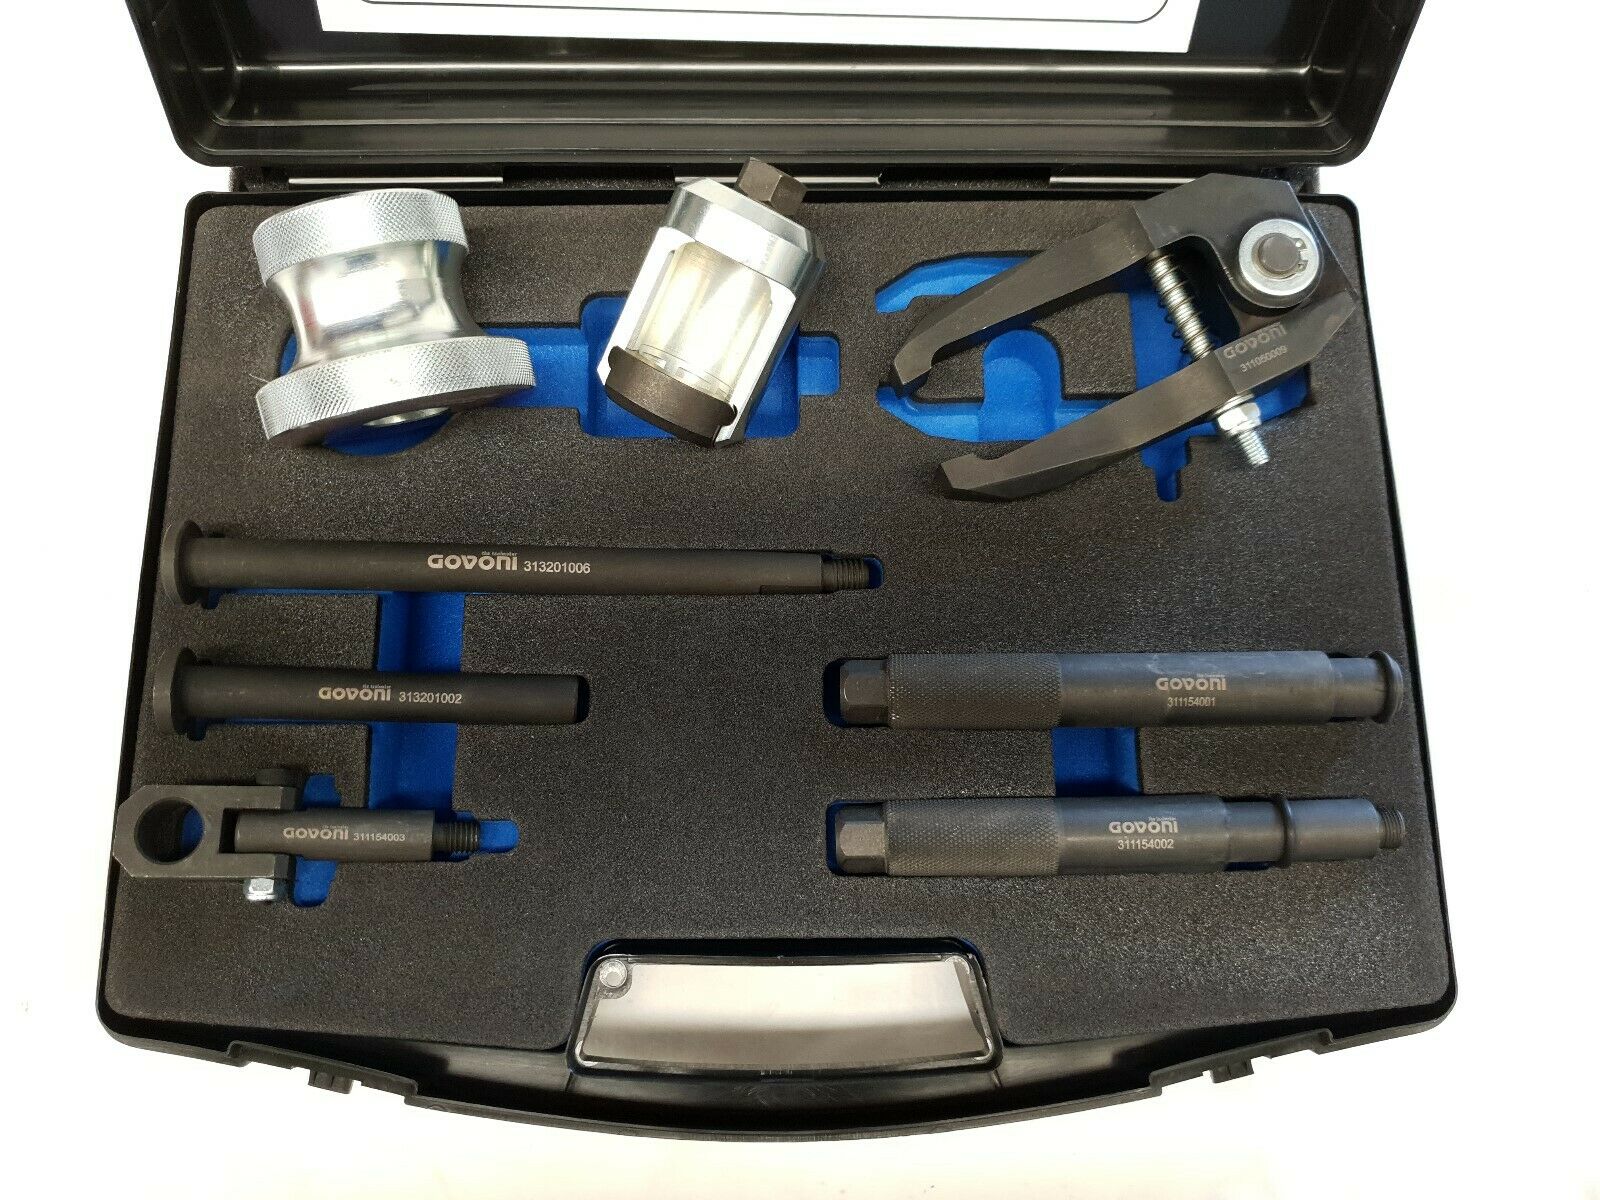 Universal Diesel injector Removal Kit with Slide Hammer and Special Injector Adaptors - Govoni - Specialist Tools Australia